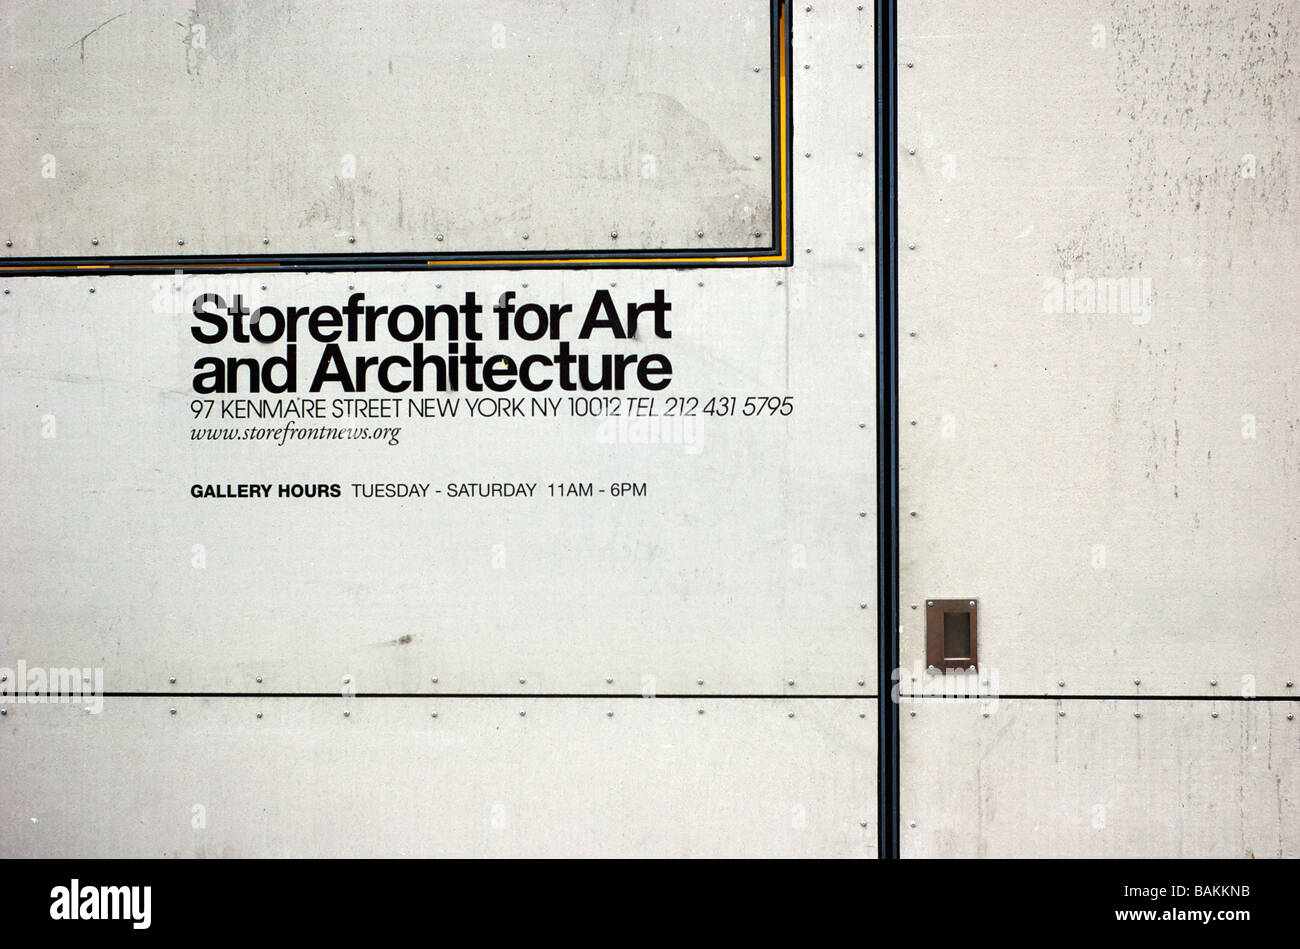 Entry for the Storefront for Art and Architecture in New York City, NY, USA (Editorial Use Only) Stock Photo